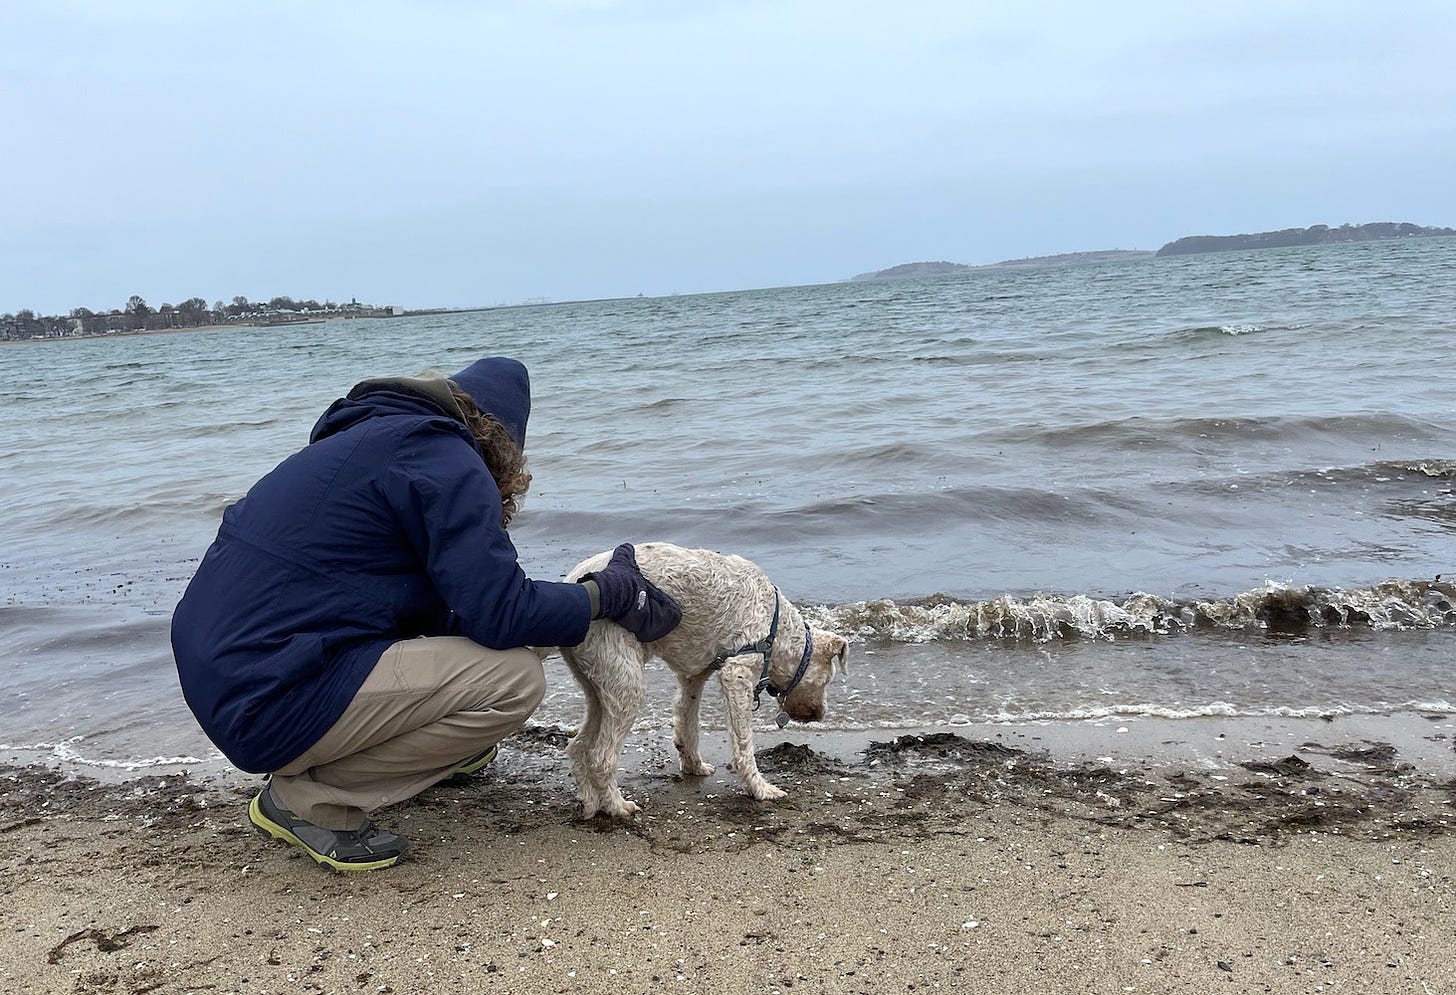 Barley, a medium-sized white dog, stands unsteadily on the shore looking at the small, incoming waves. 